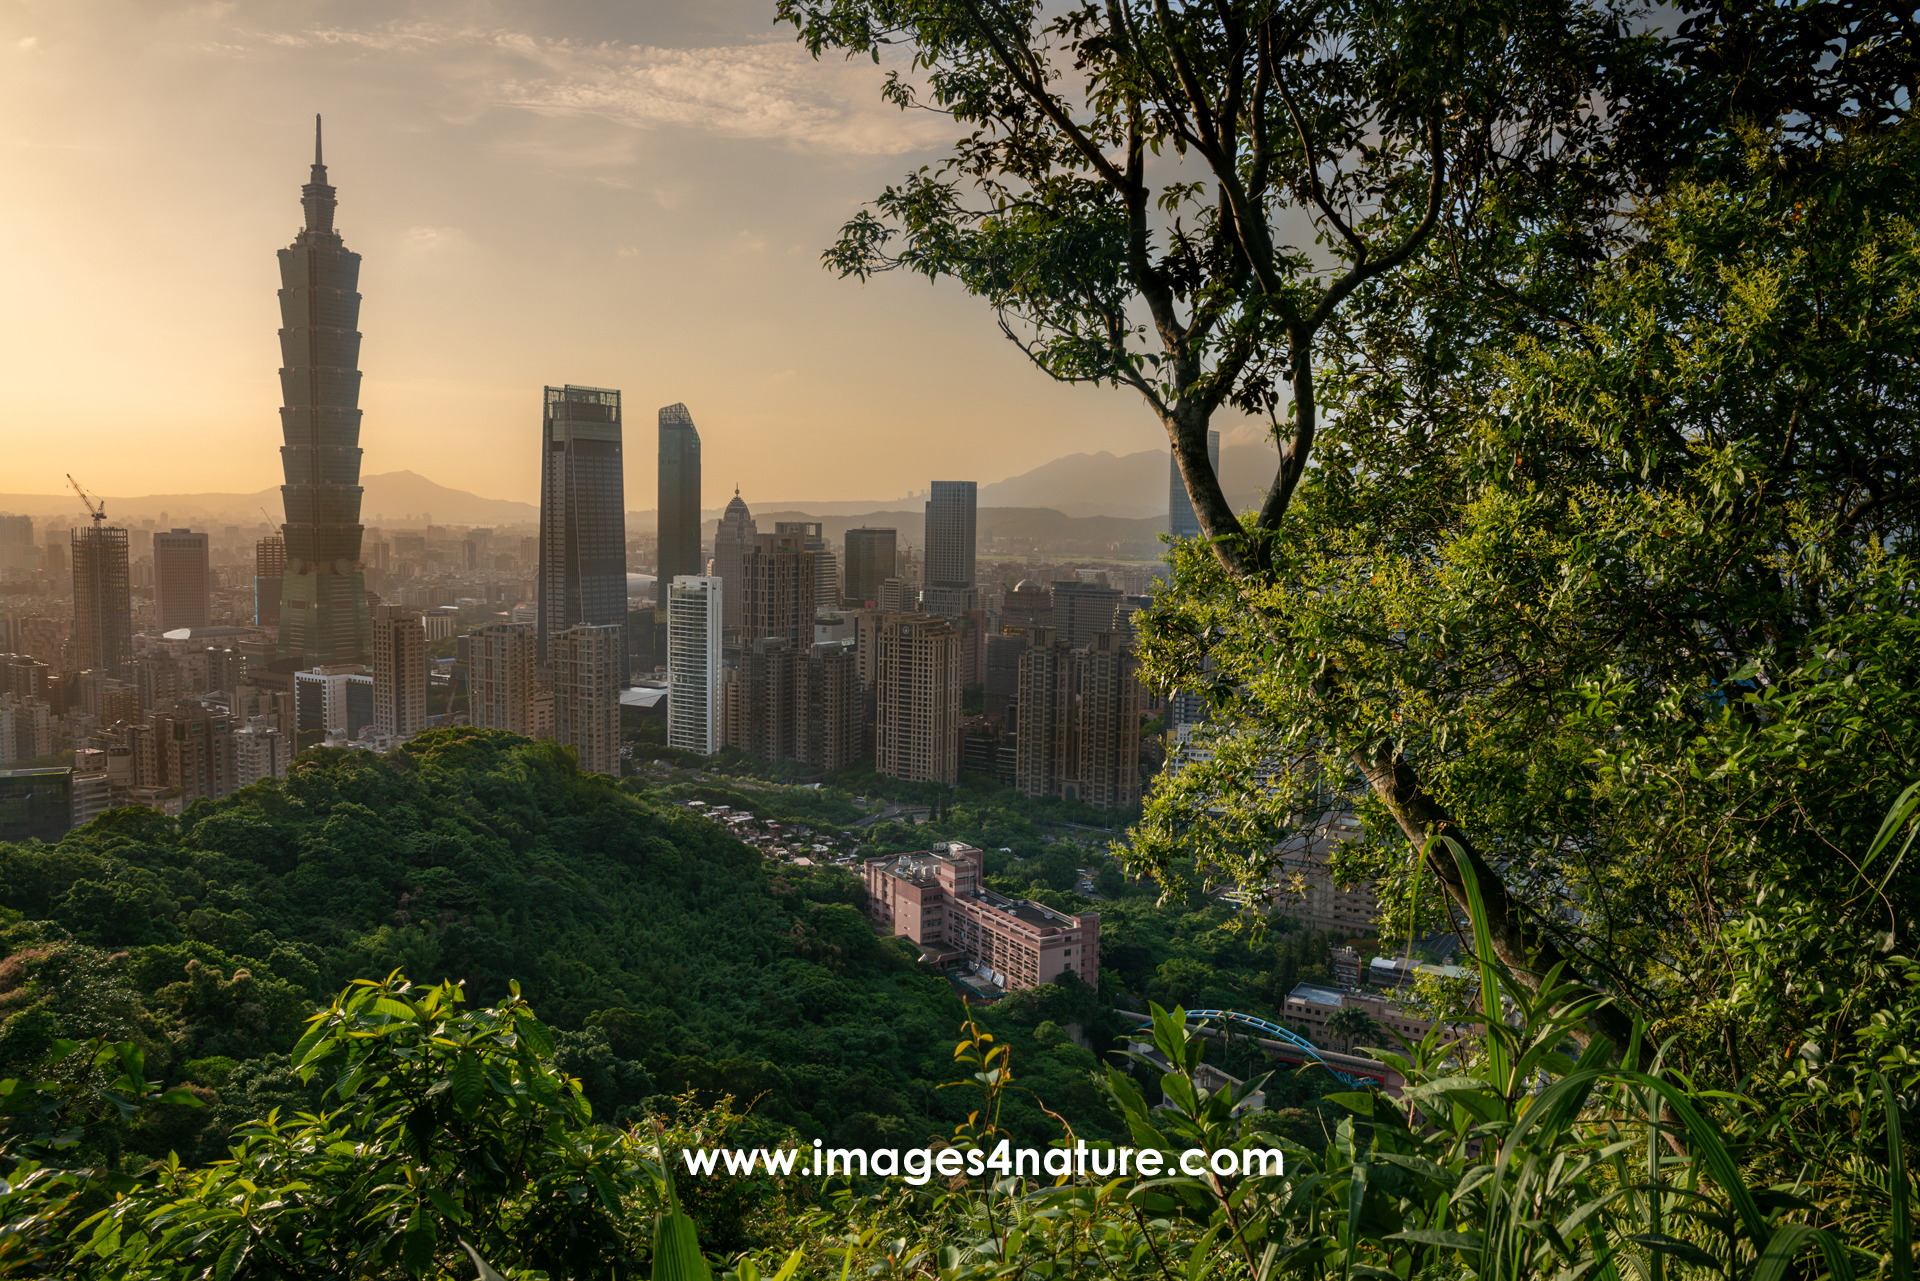 Afternoon view out of the forest onto downtown Taipei with Taipei 101, Breeze Plaza and other high rise buildings